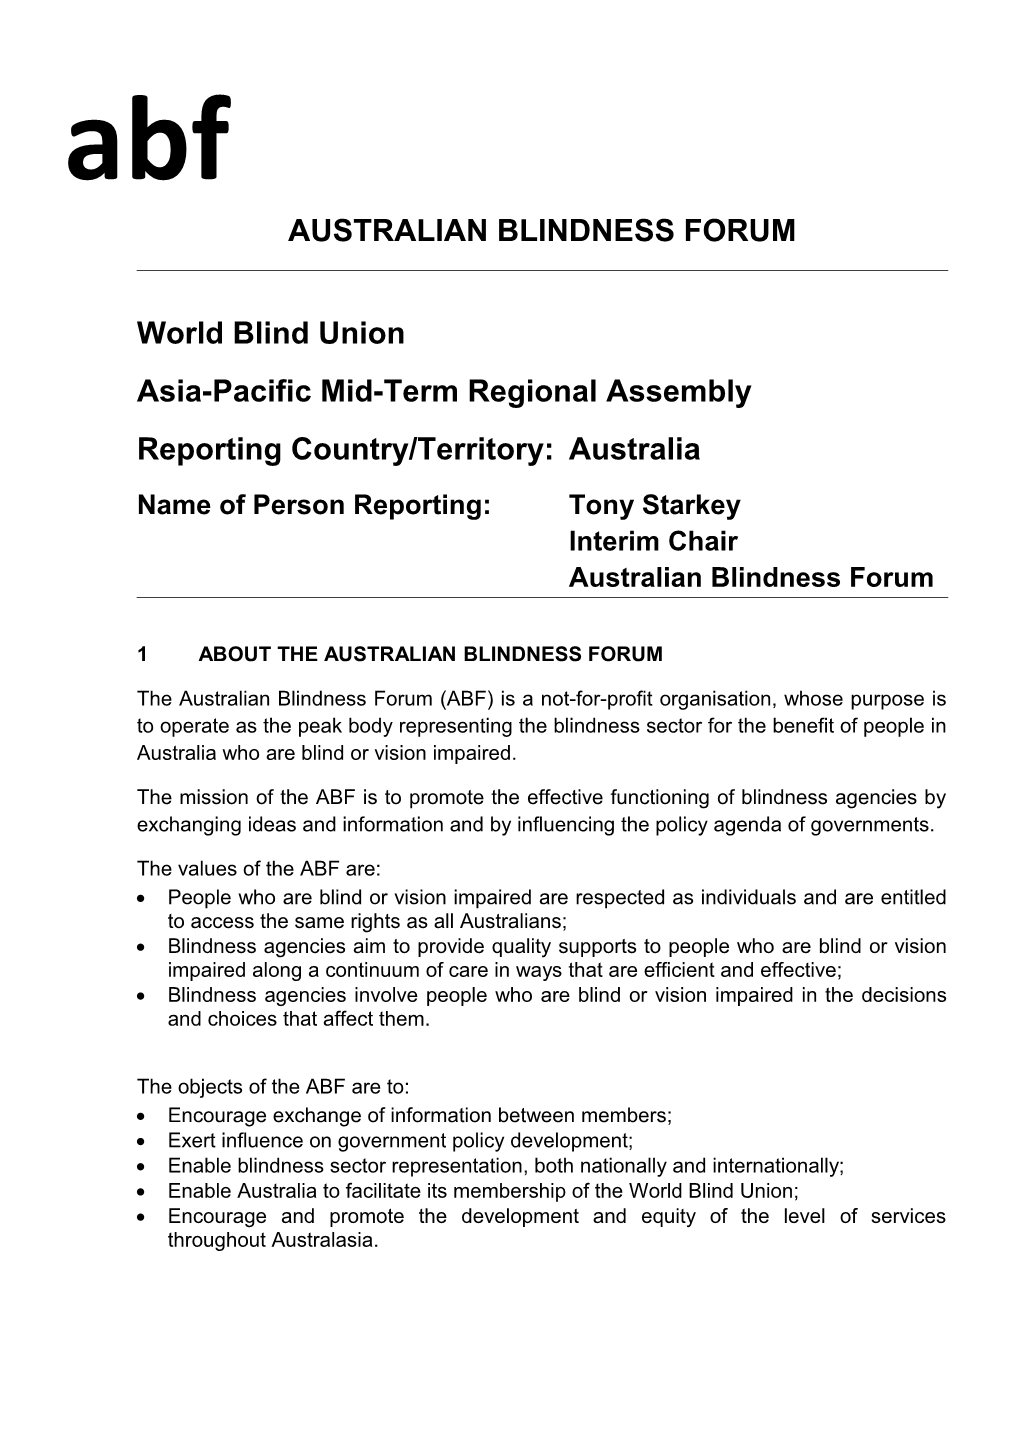 Asia-Pacific Mid-Term Regional Assembly